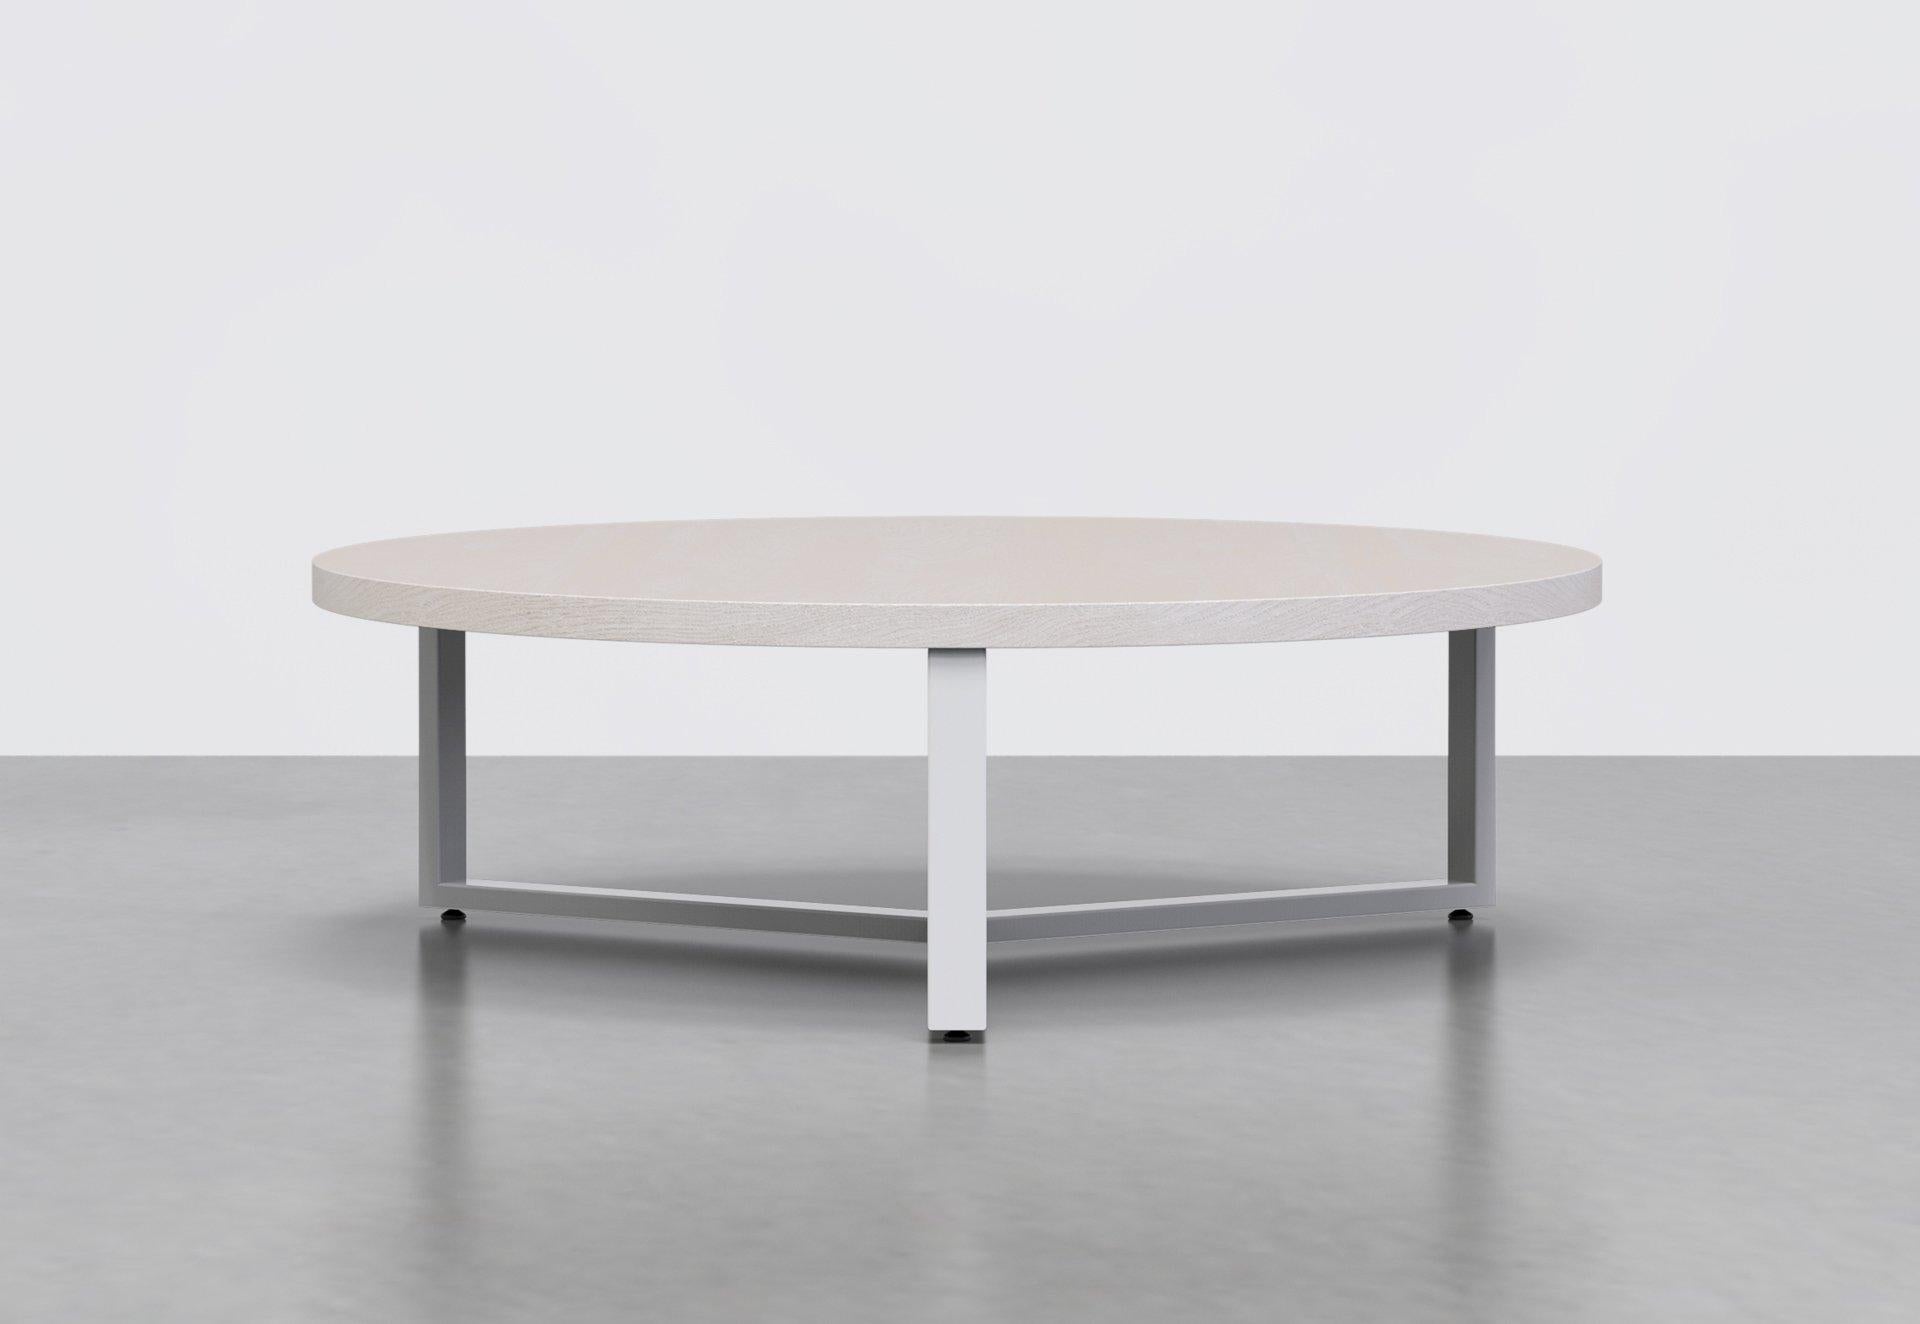 Simplicity and sophistication in one. The anchor coffee table's essential powder-coated steel base supports a durable round veneer top.